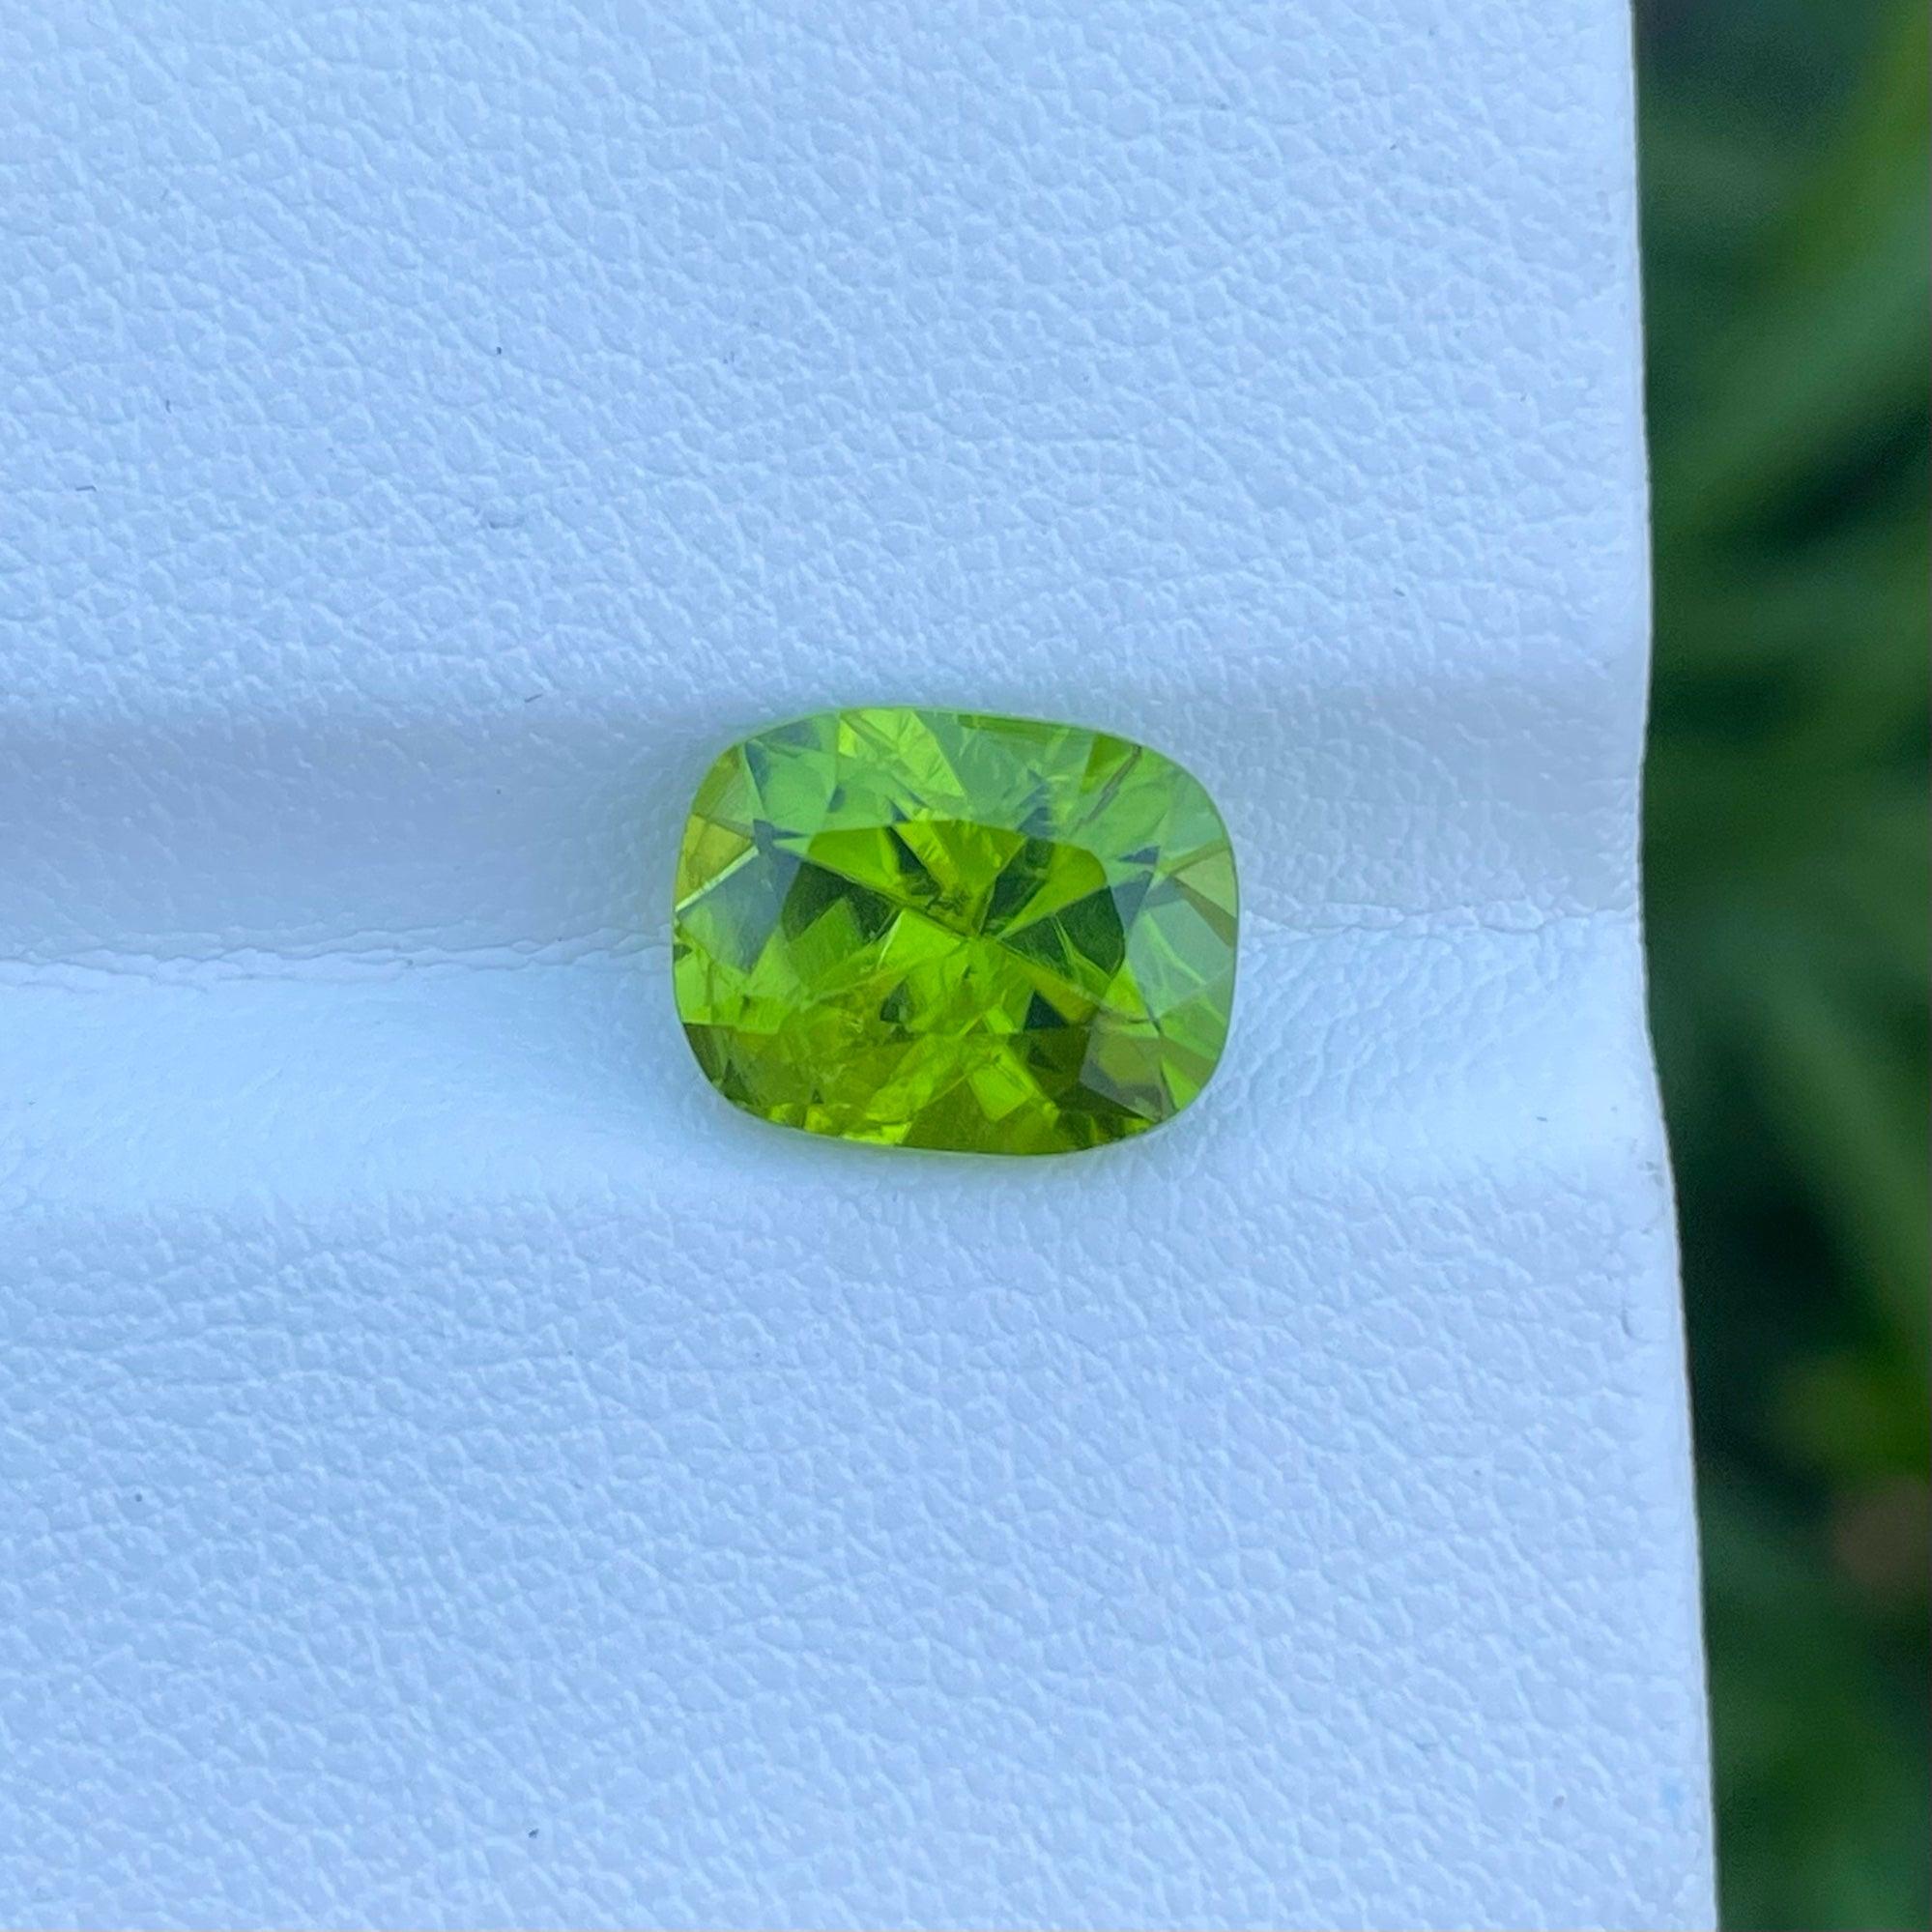 Lovely Natural Apple Green Peridot Gemstone, Available for Sale at wholesale price natural high quality 4.0 carats VVS Clarity loose Peridot from Pakistan.

 

Product Information:
GEMSTONE TYPE:	Lovely Natural Apple Green Peridot